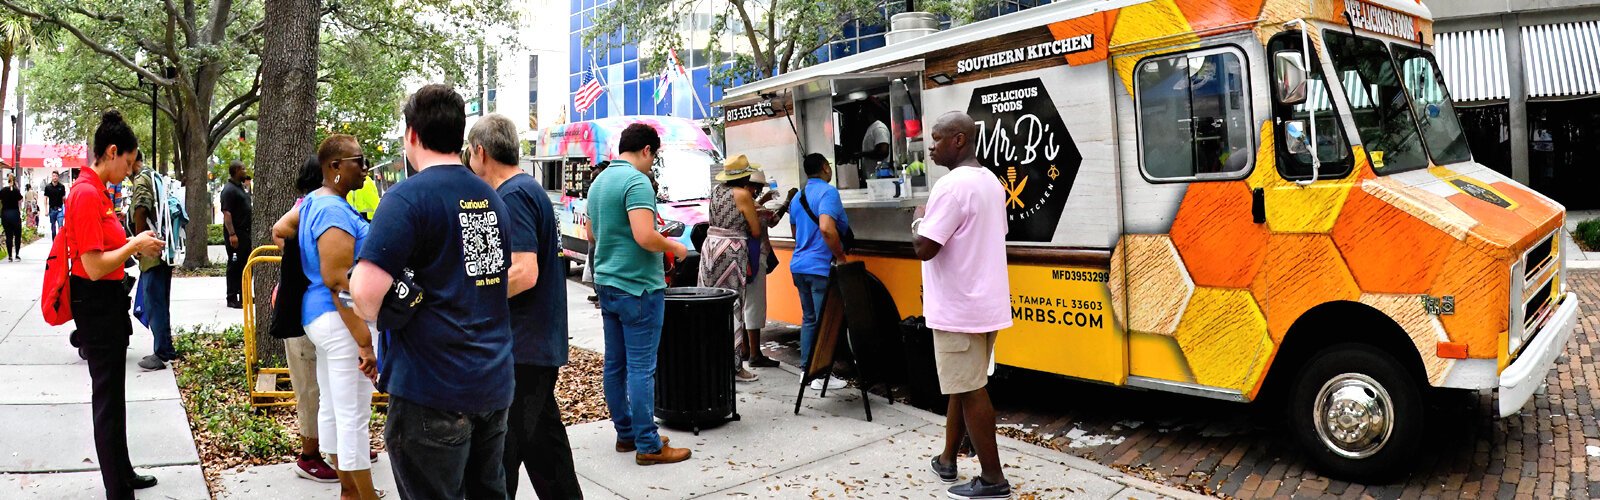 Festival attendees have the opportunity to quench their thirst and hunger at various food trucks during the Juneteenth festival. 